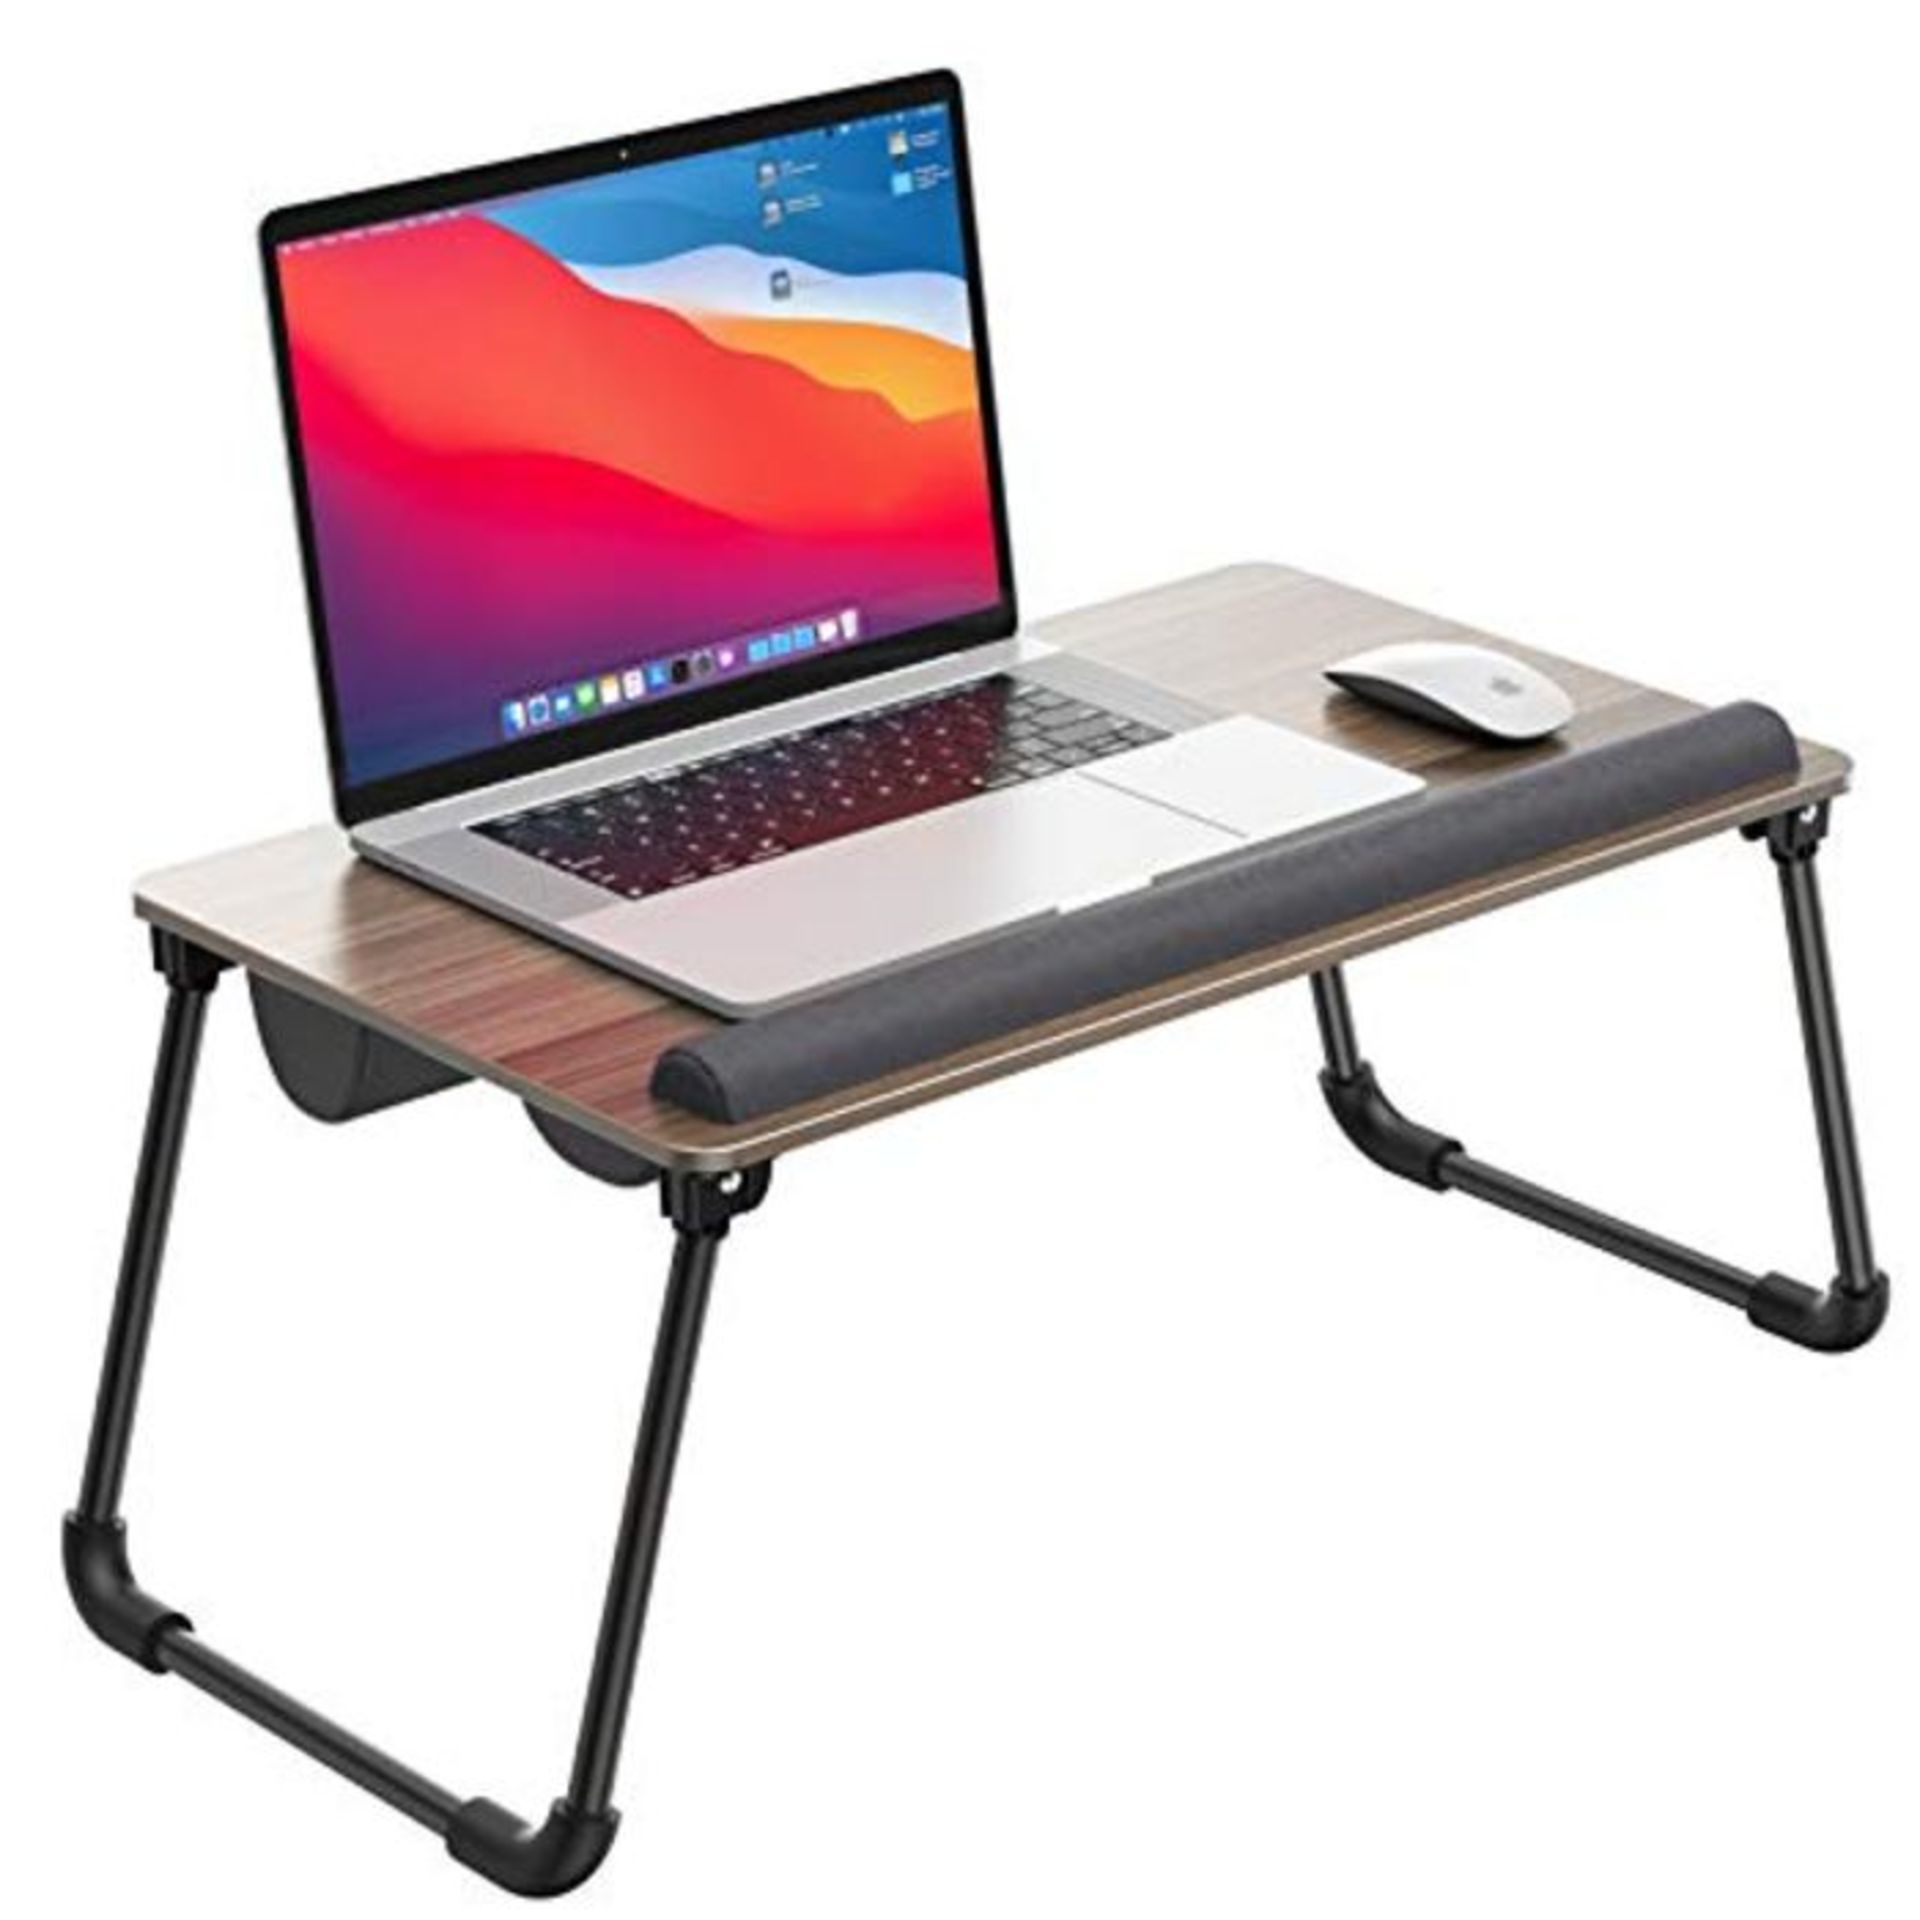 ATUMTEK Laptop Lap Tray Fits Up to 17.3 inches Laptops, 2 in 1 Laptop Tray for Bed wit